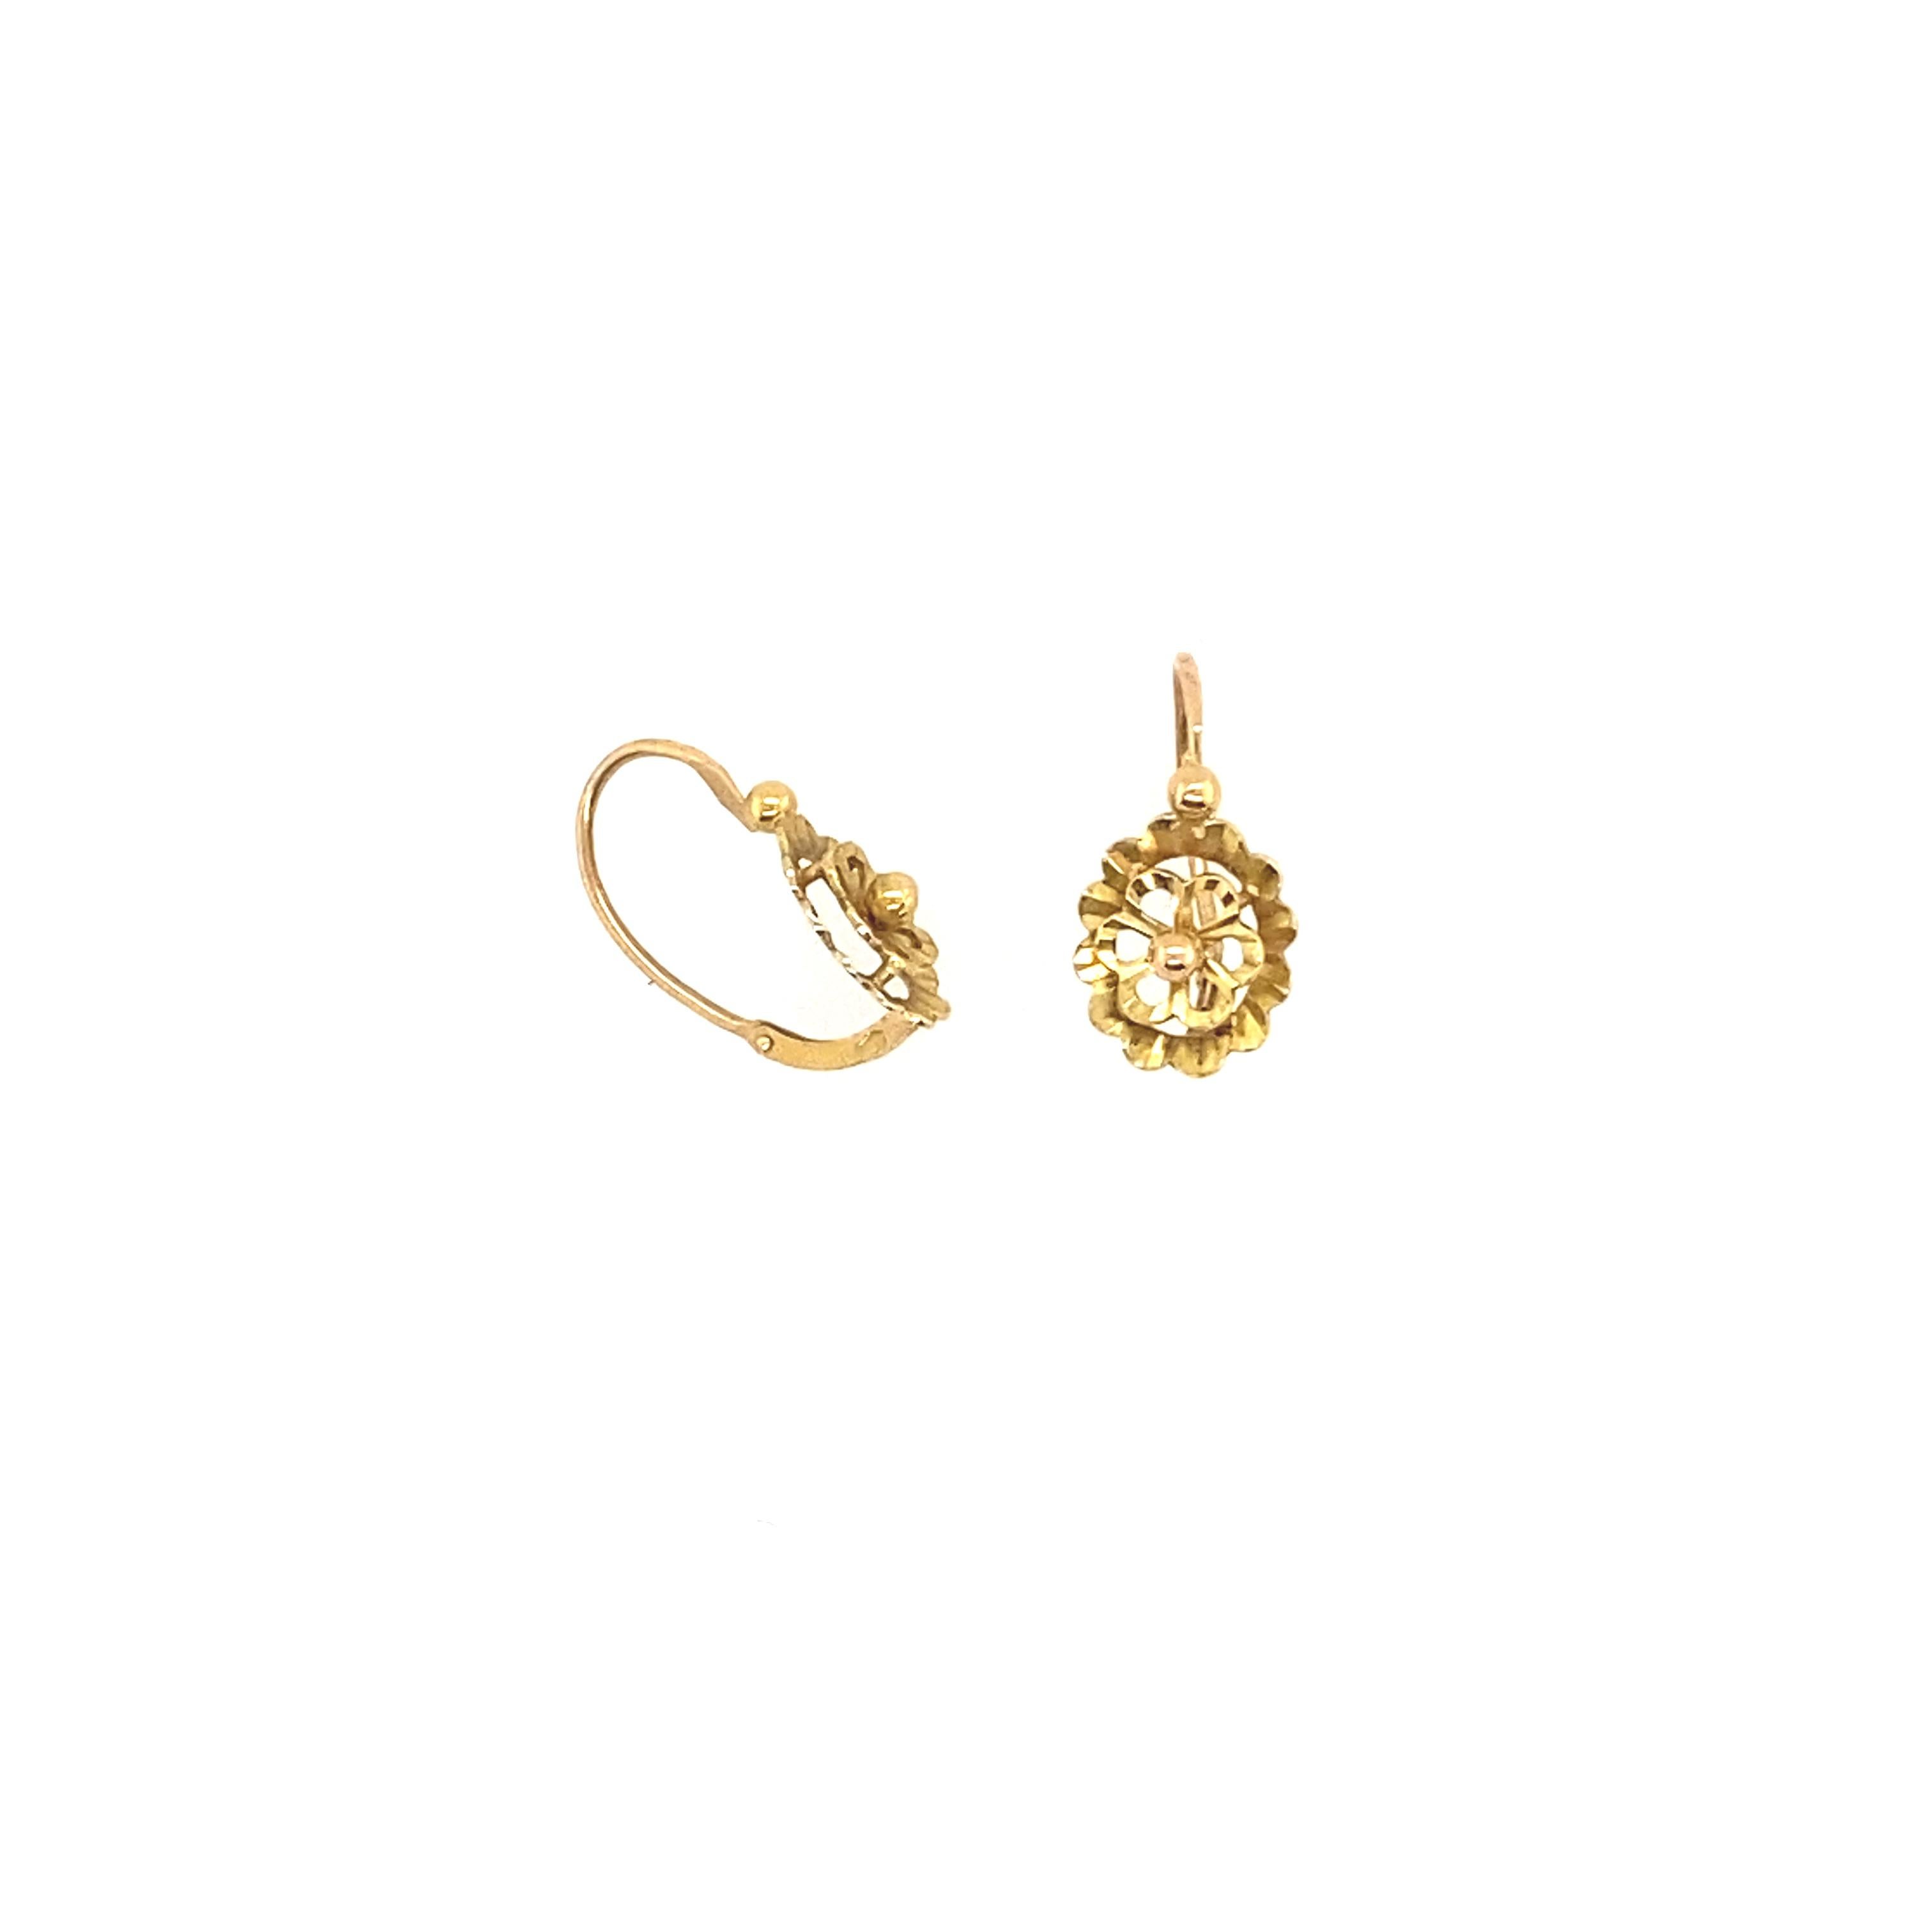 Welcome to our showcase page, where we're delighted to present this elegant pair of French Dormeur earrings in 18K gold, earrings that add a touch of refinement to your style.

These 18-carat gold Dormeur earrings are exceptional pieces, carefully